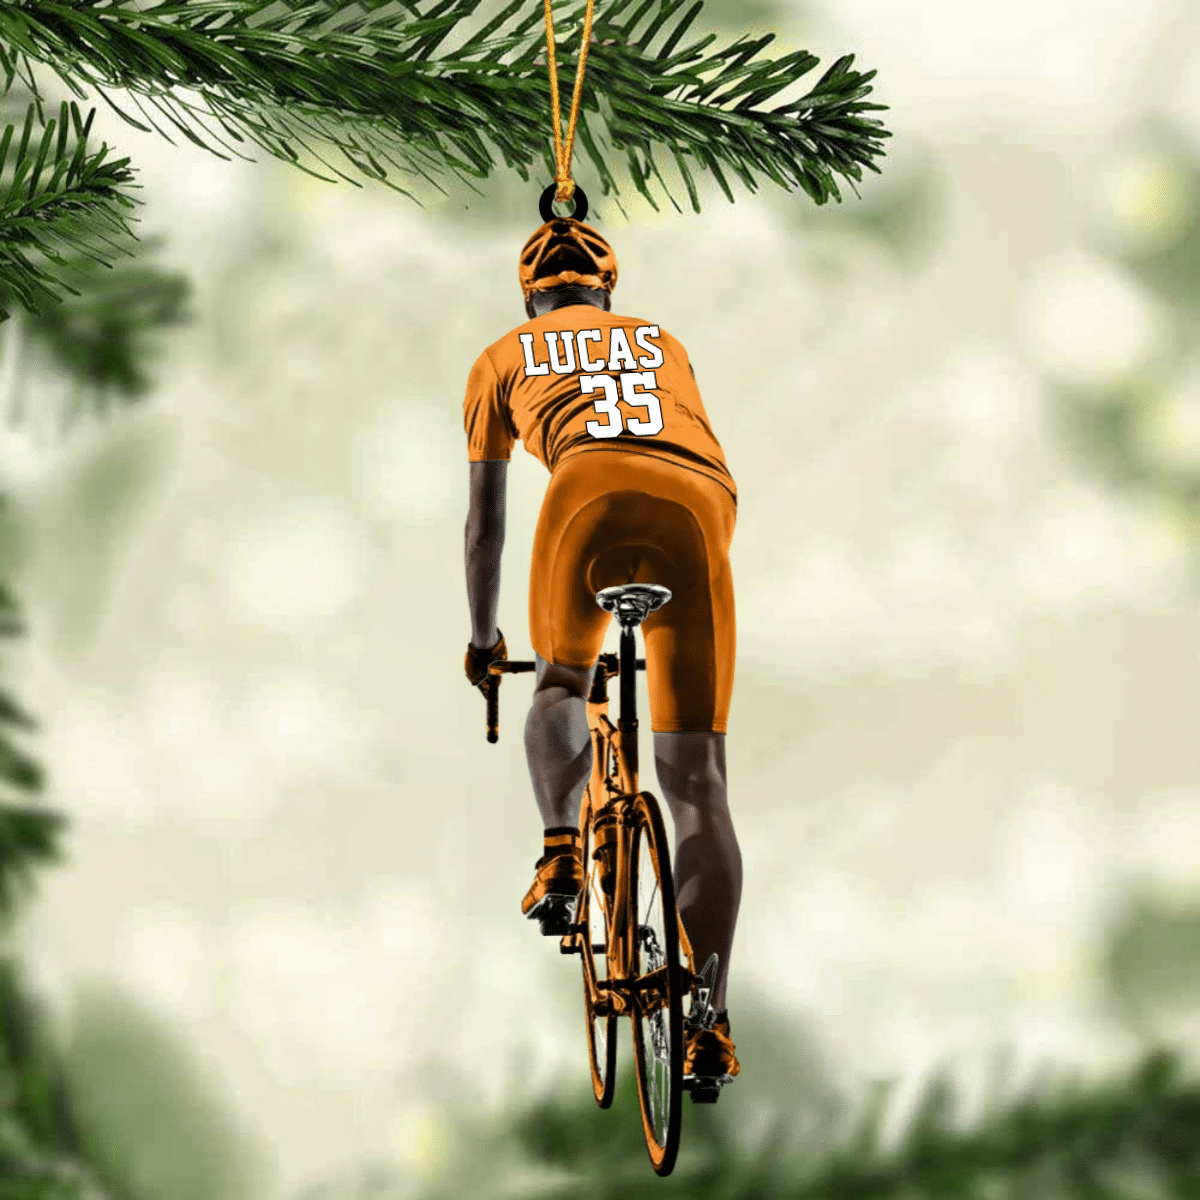 Customized Black Man Cyclist/ Bike Riding Acrylic Ornament/ Gift For Cyclists/ Gift for Man